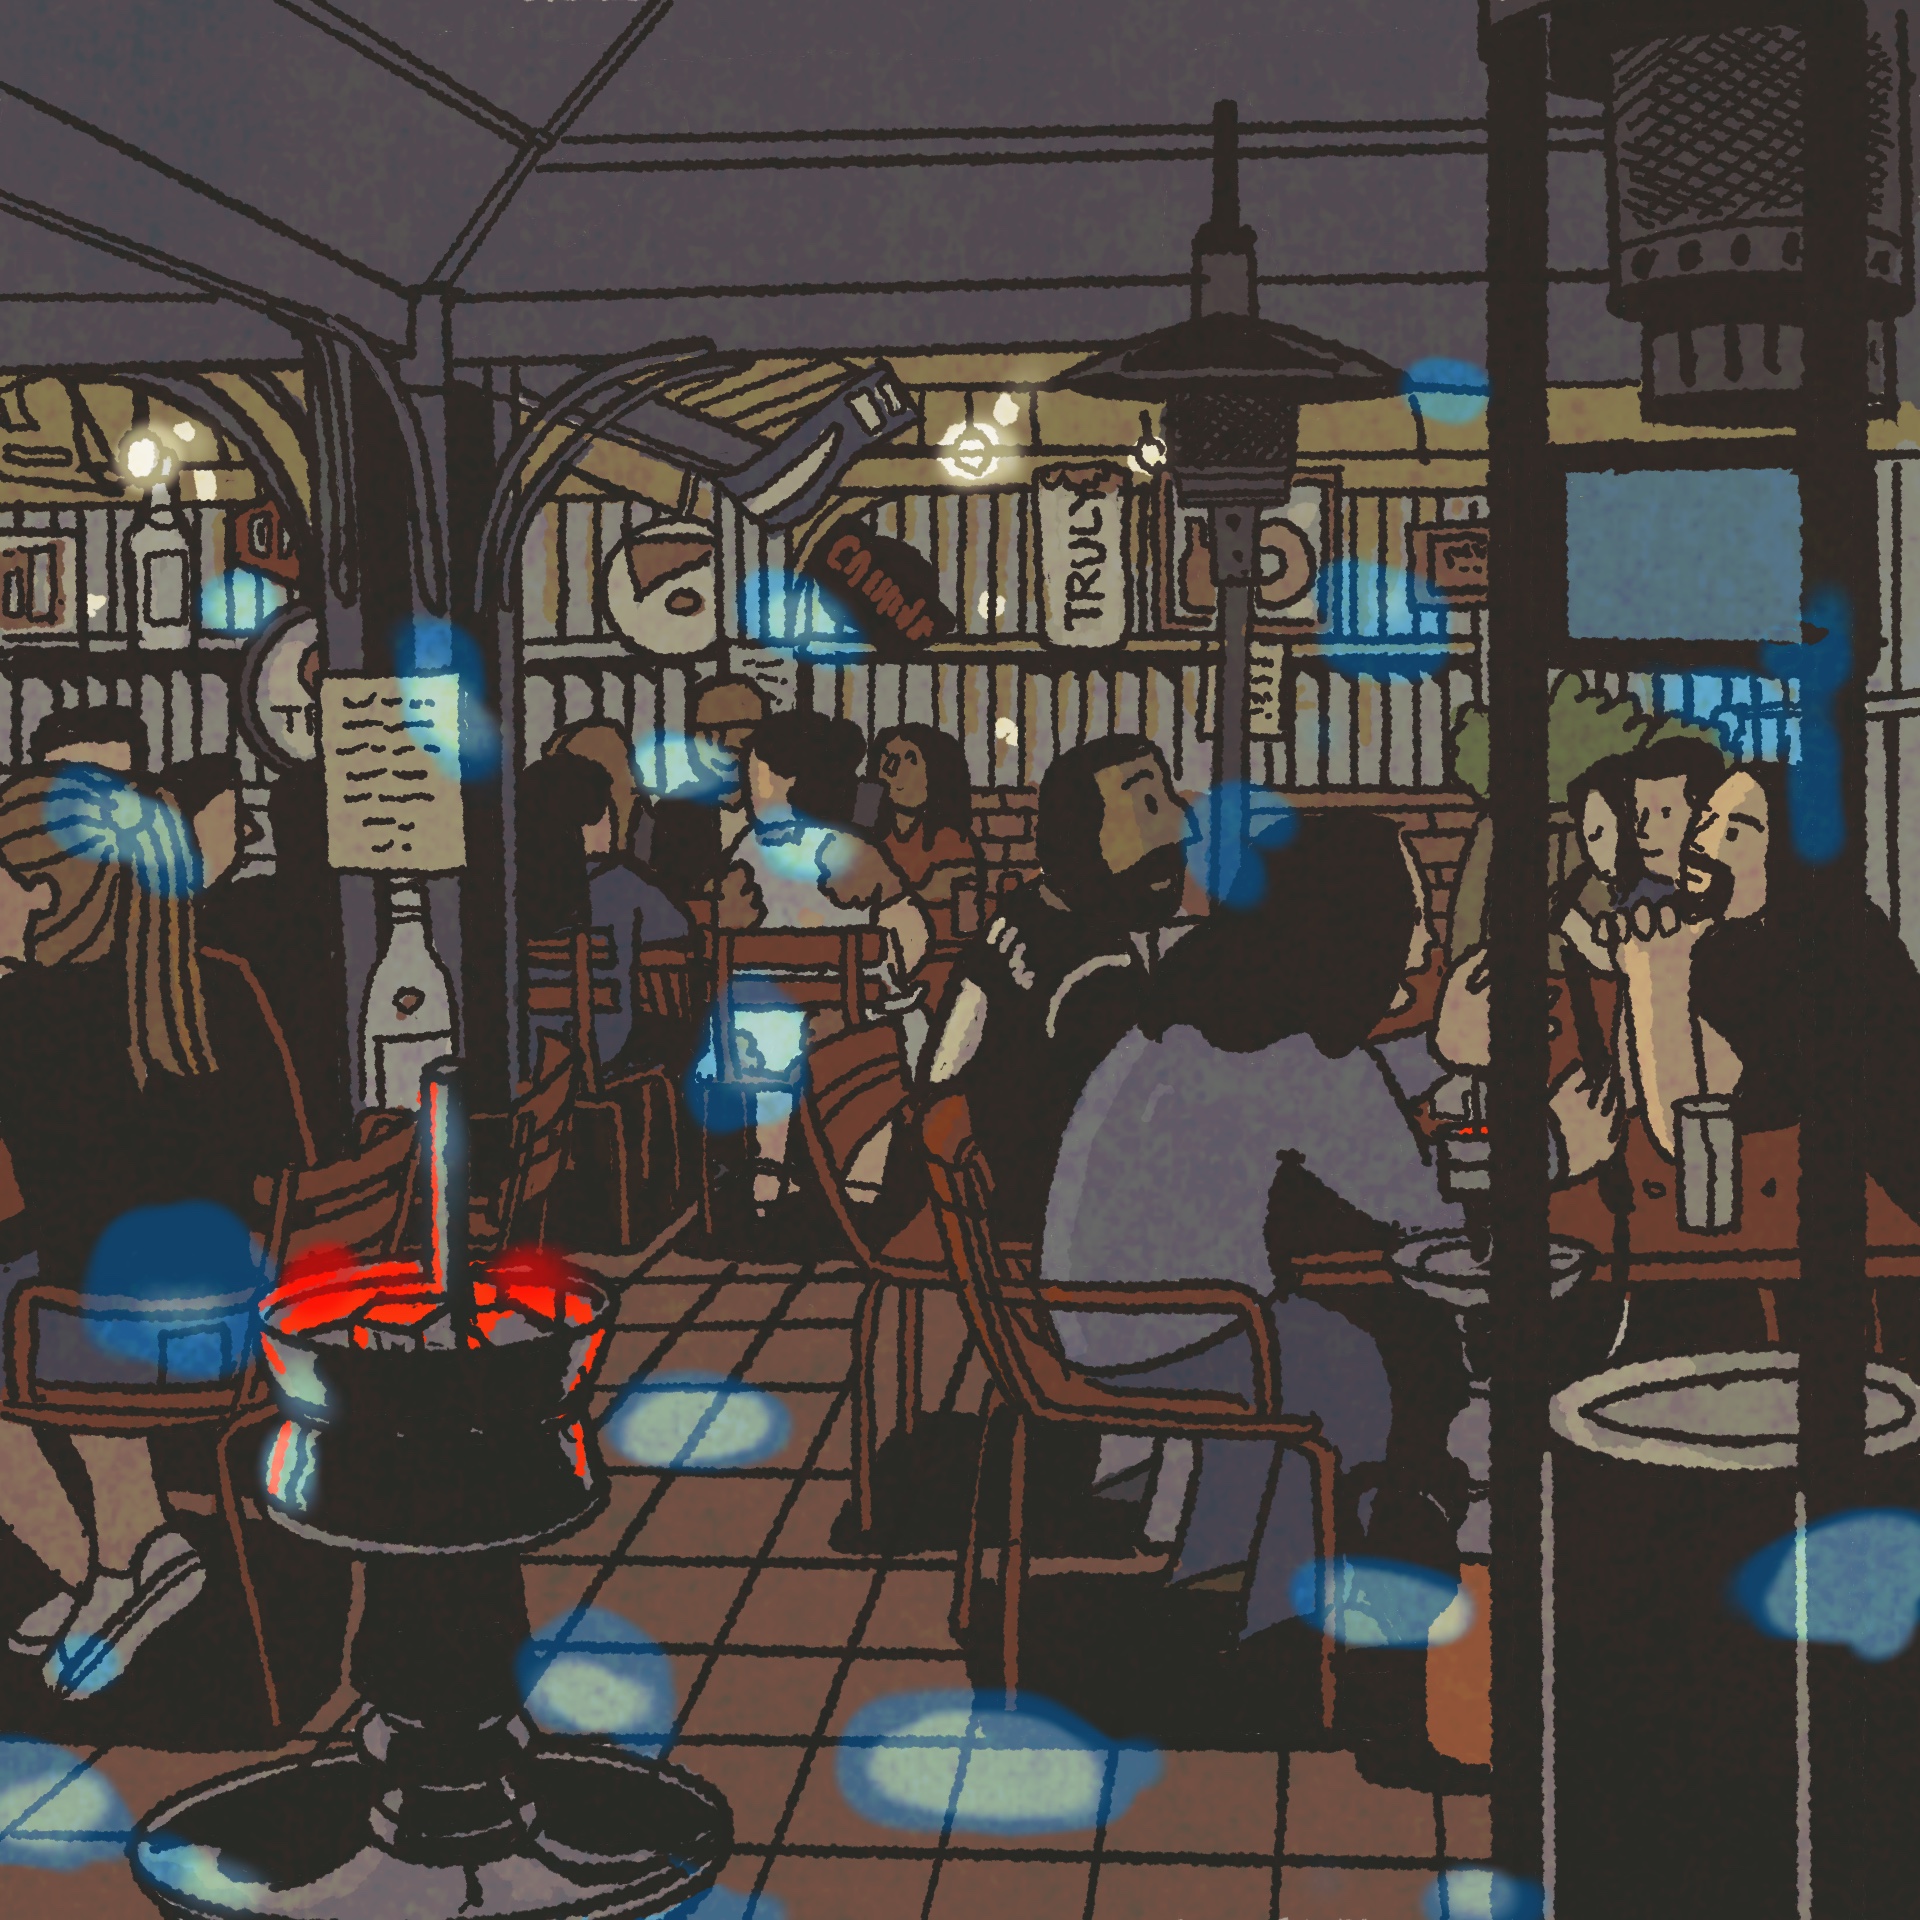 Illustration: Inside a bar, groups of friends chat. Hookah pipes with glowing red coals are placed next to the tables.